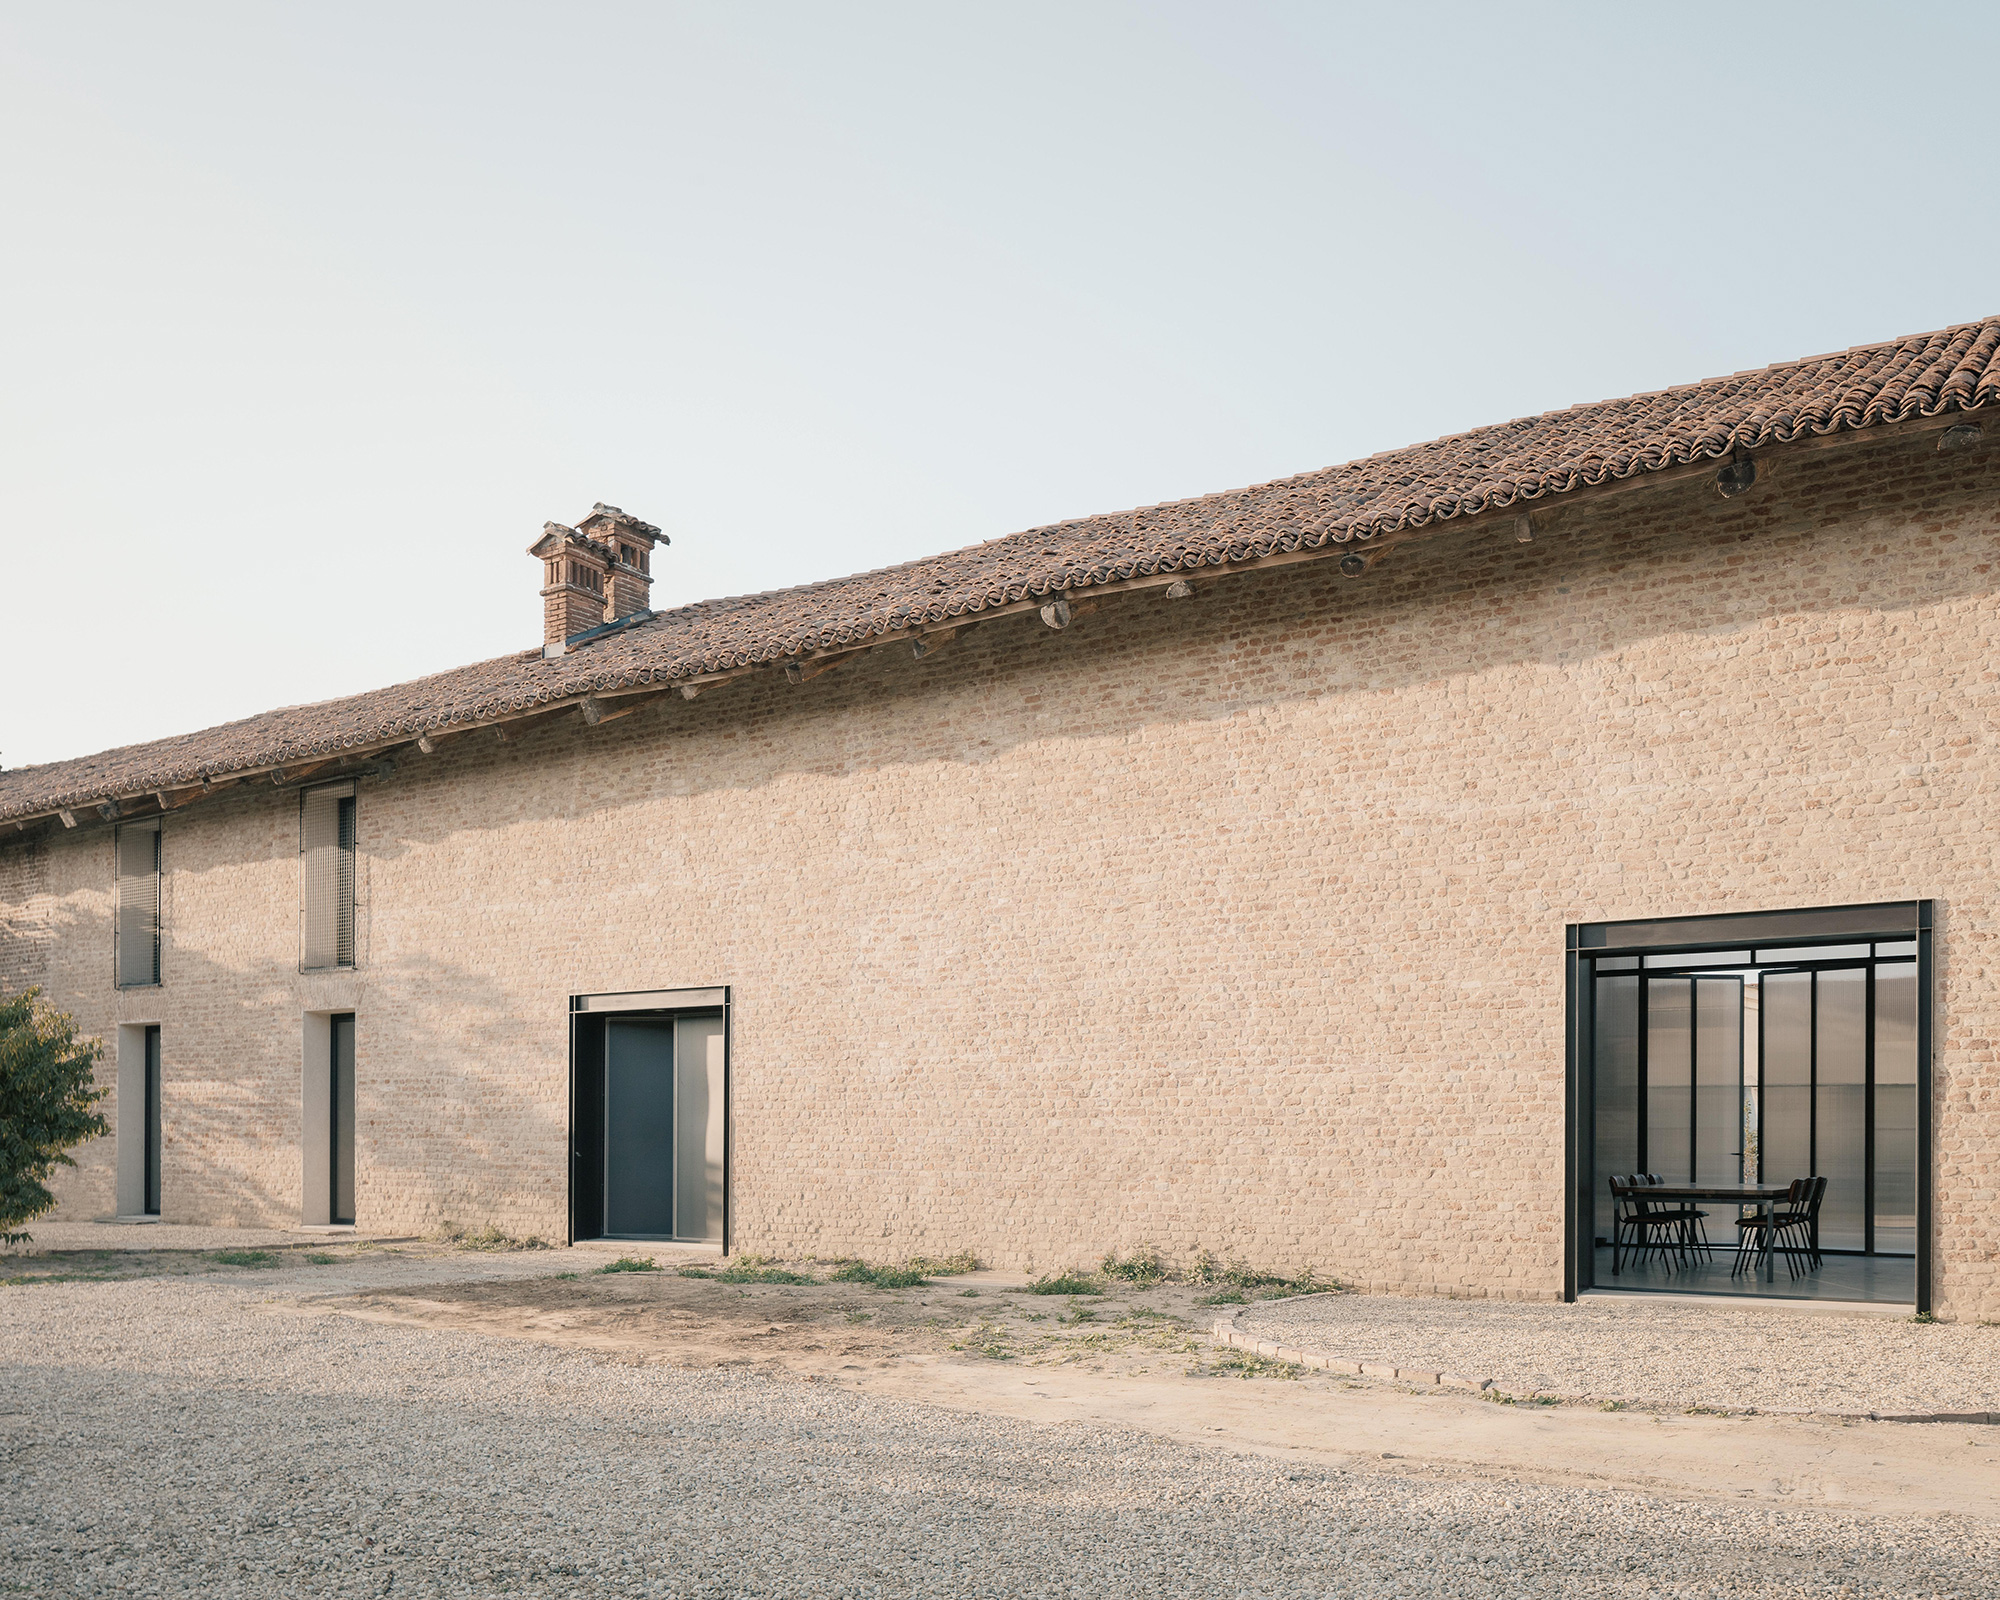 We Rural Country House - Gessato